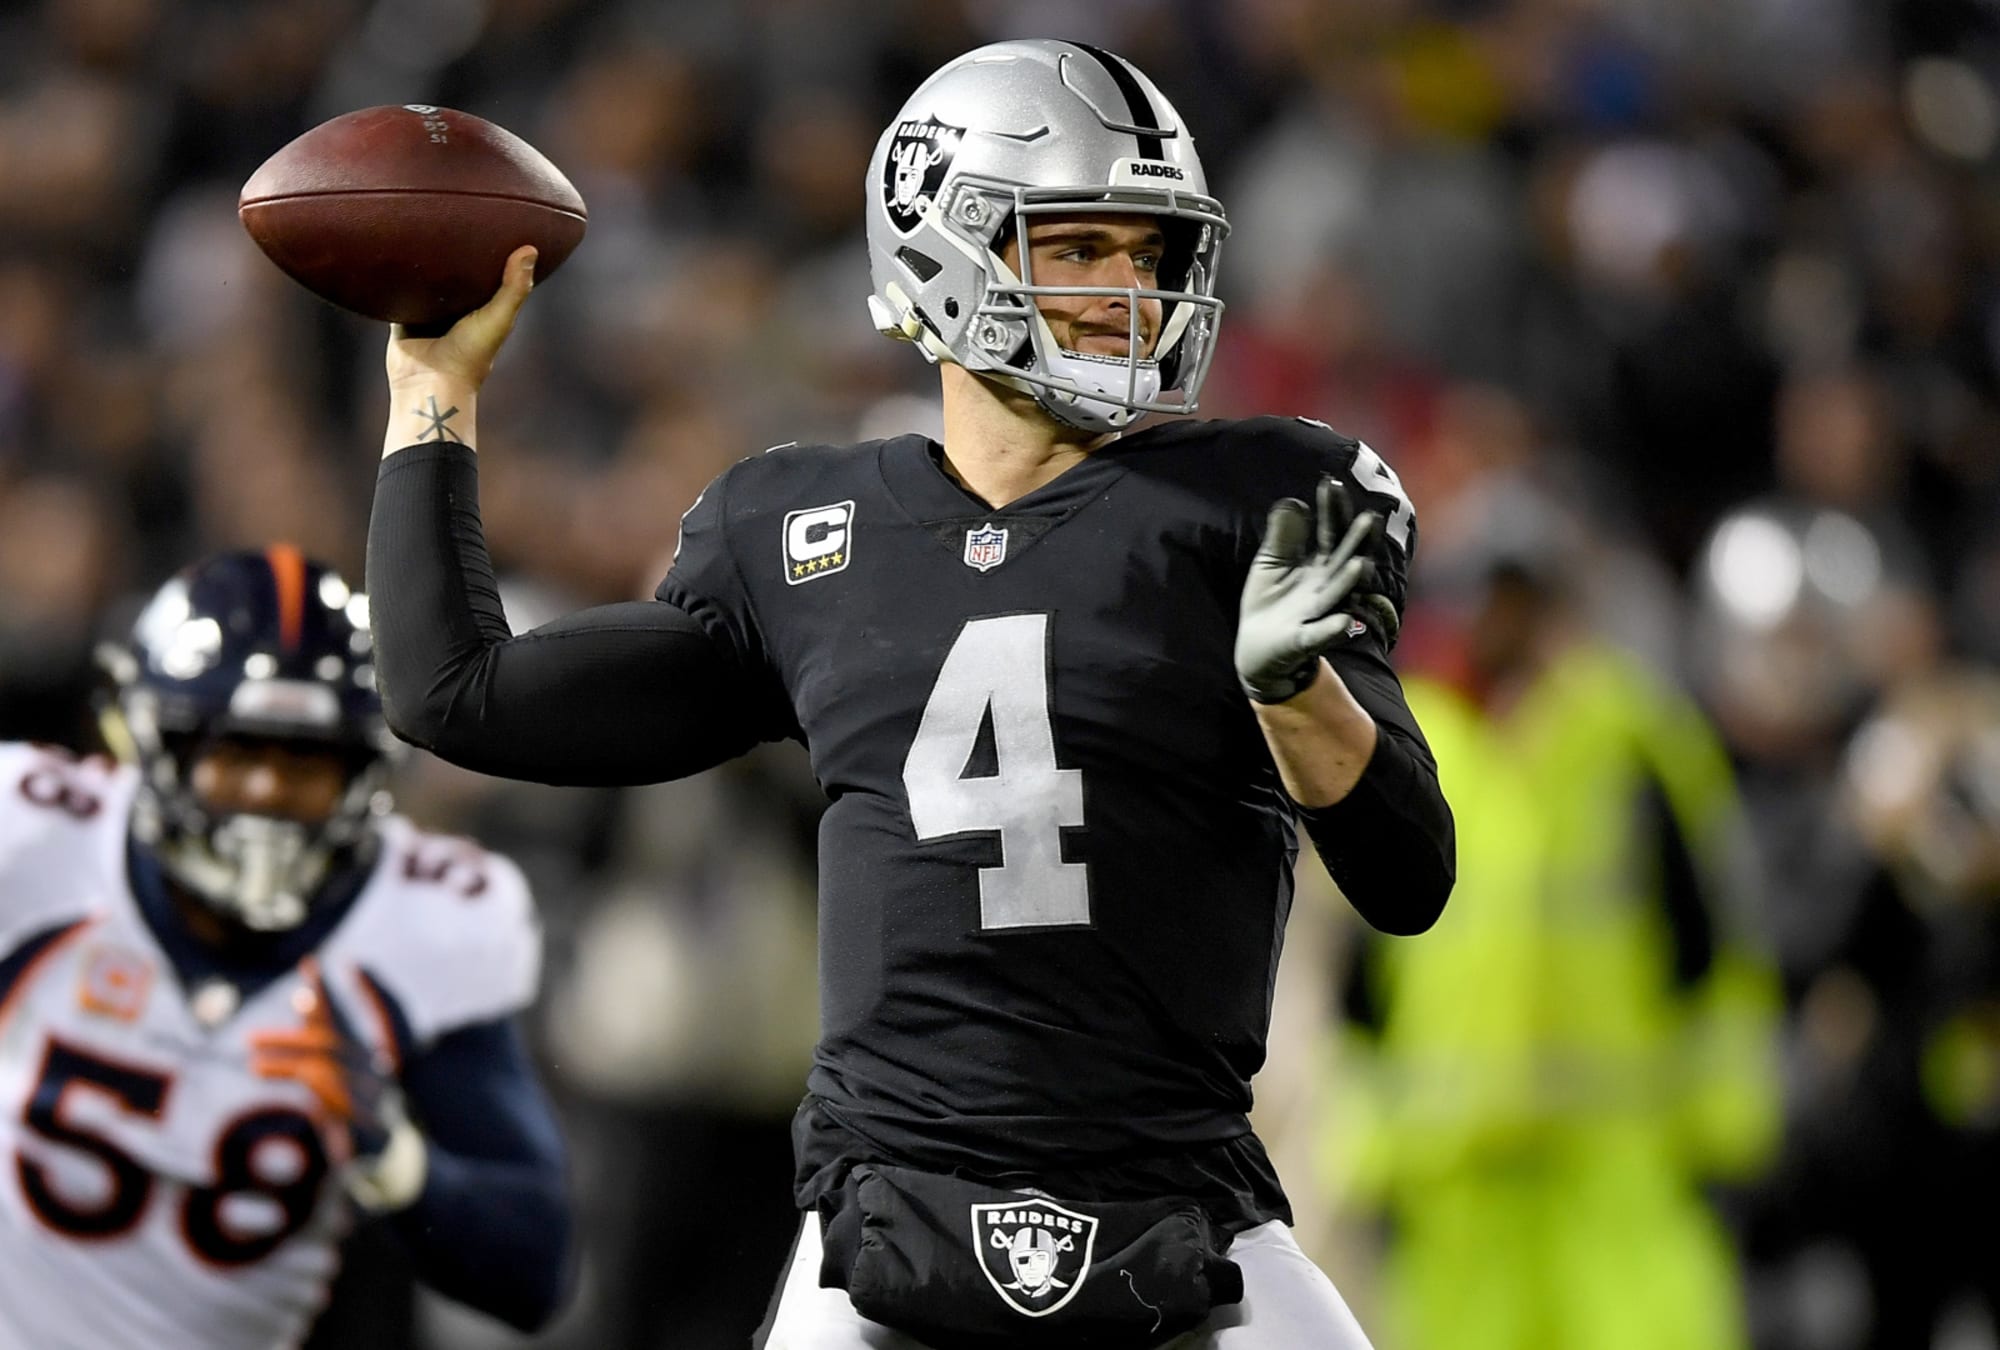 Oakland Raiders uniforms ranked in the top-5 in the NFL